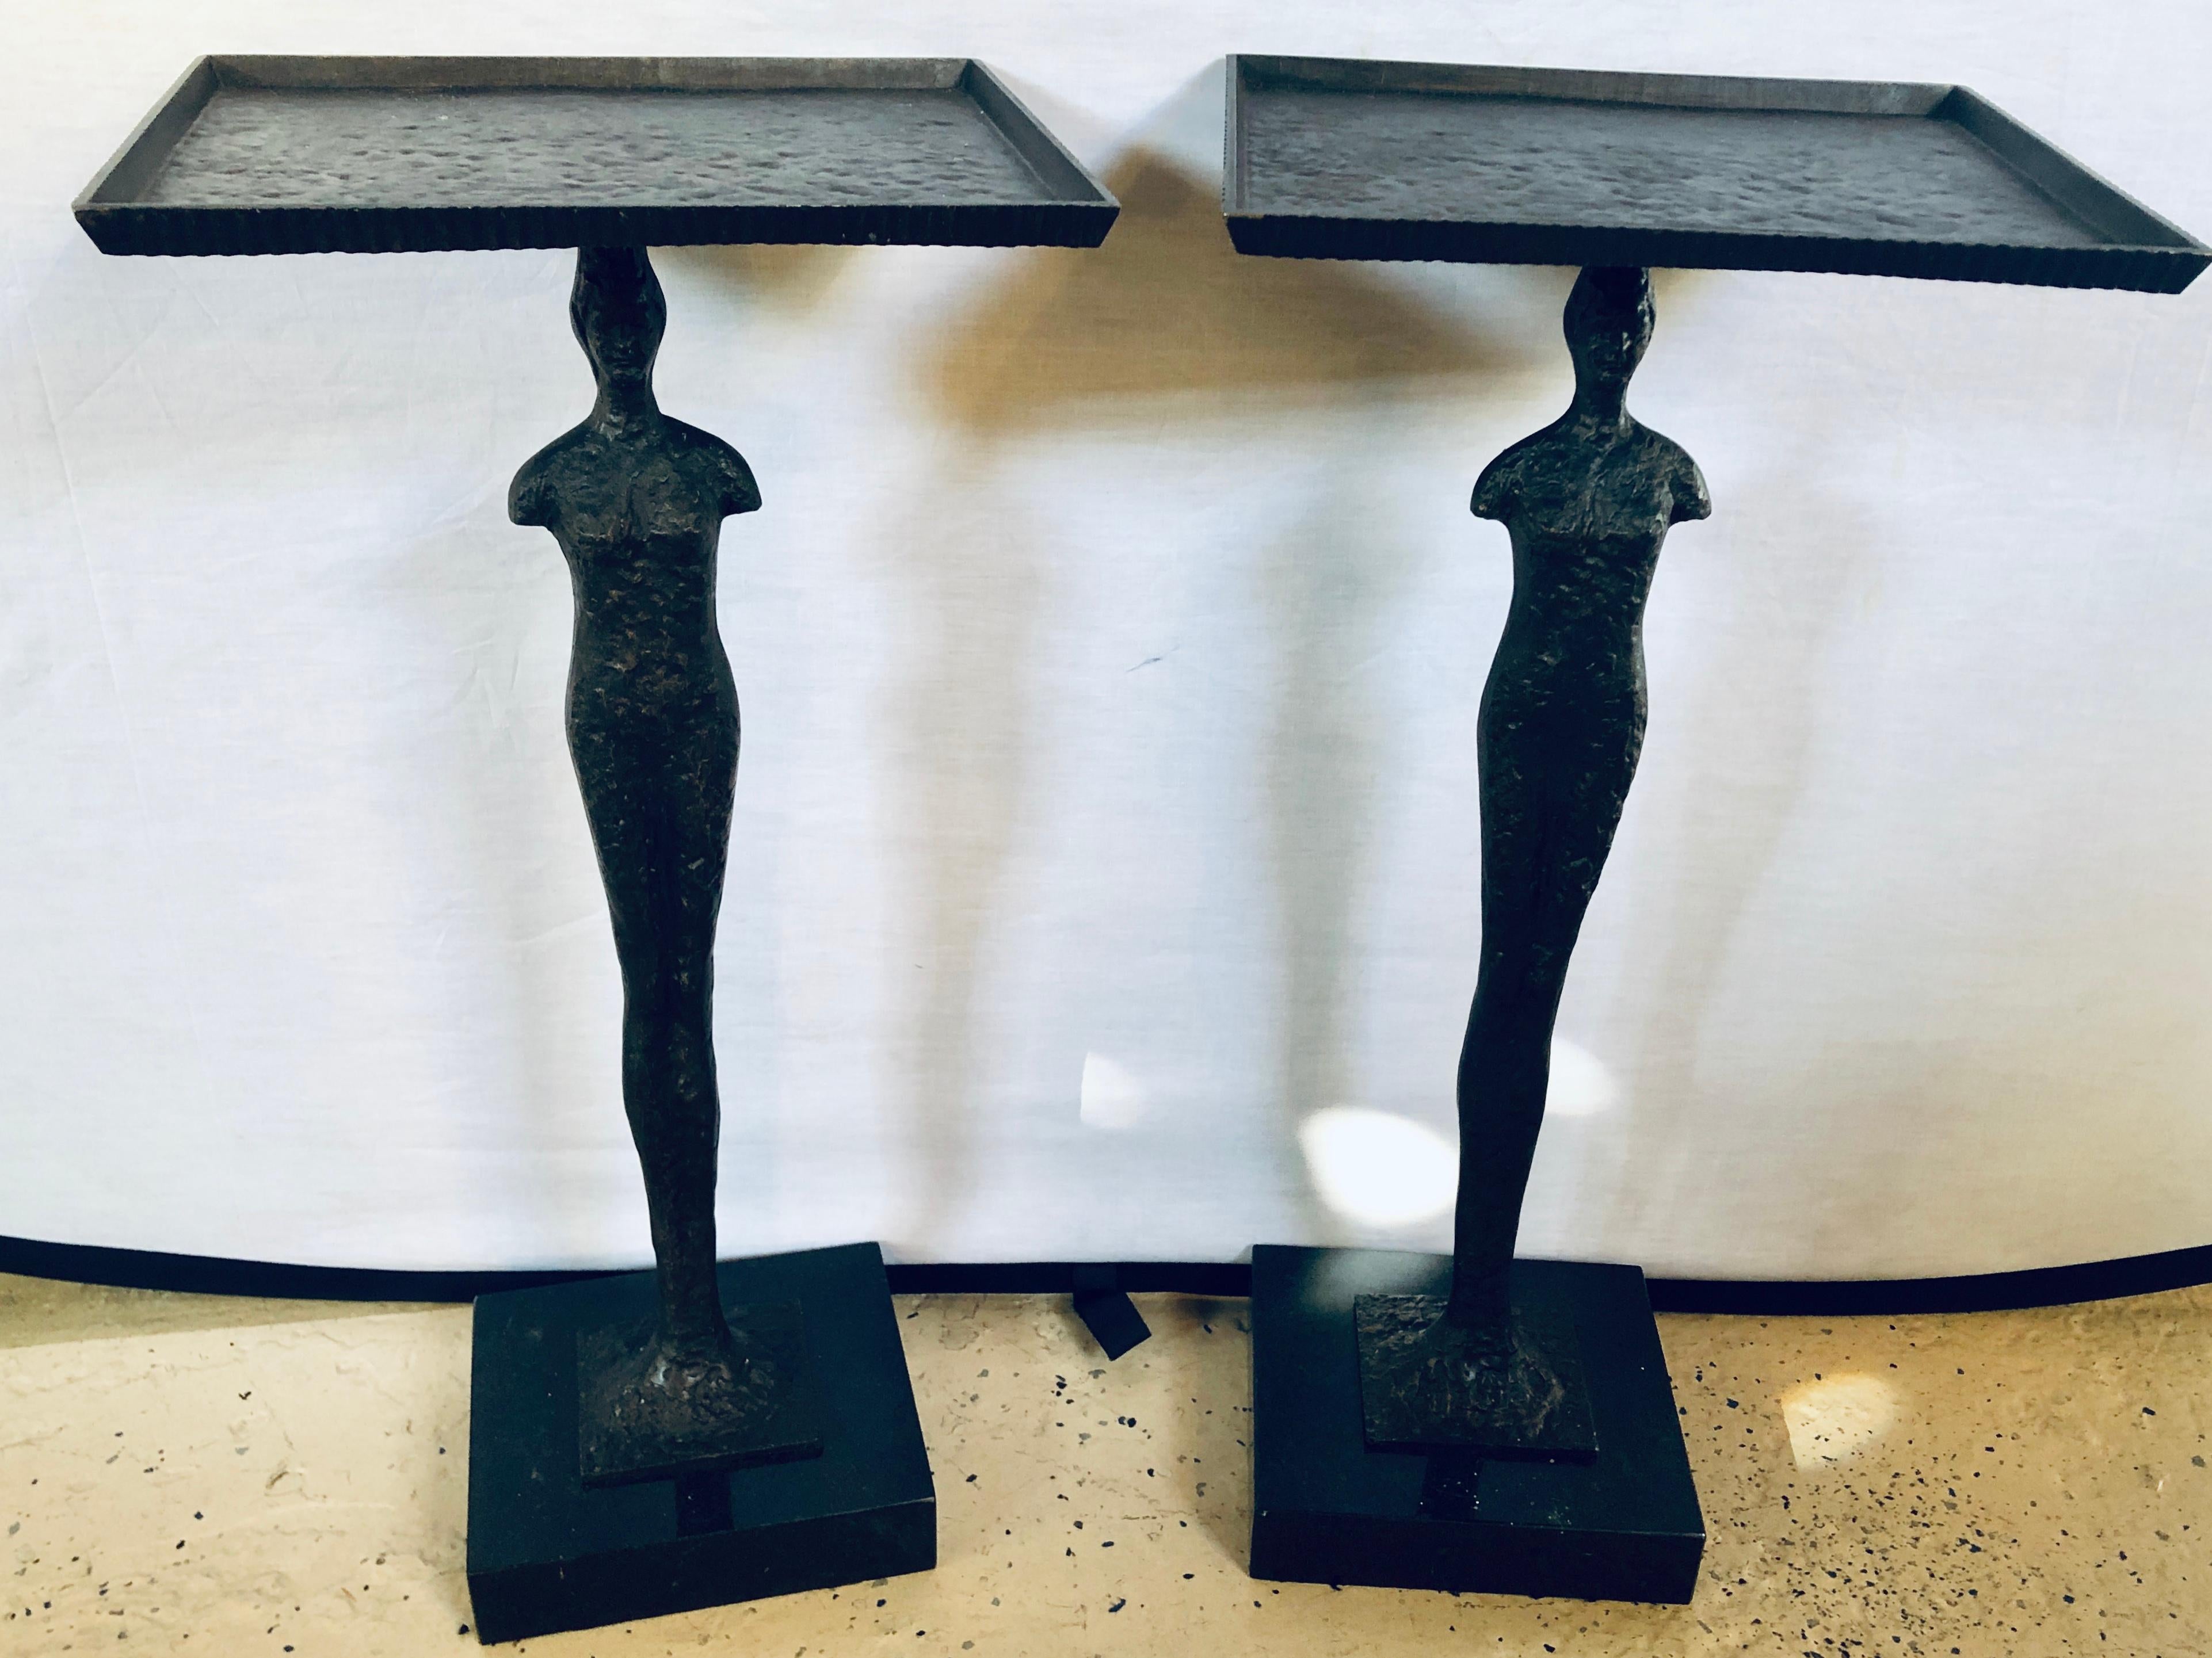 Pair of Diego Giacometti? style tray stands. Each having a single figure of a man with arms folded balancing a tray on his head. The pair standing on a think marble or granite base.